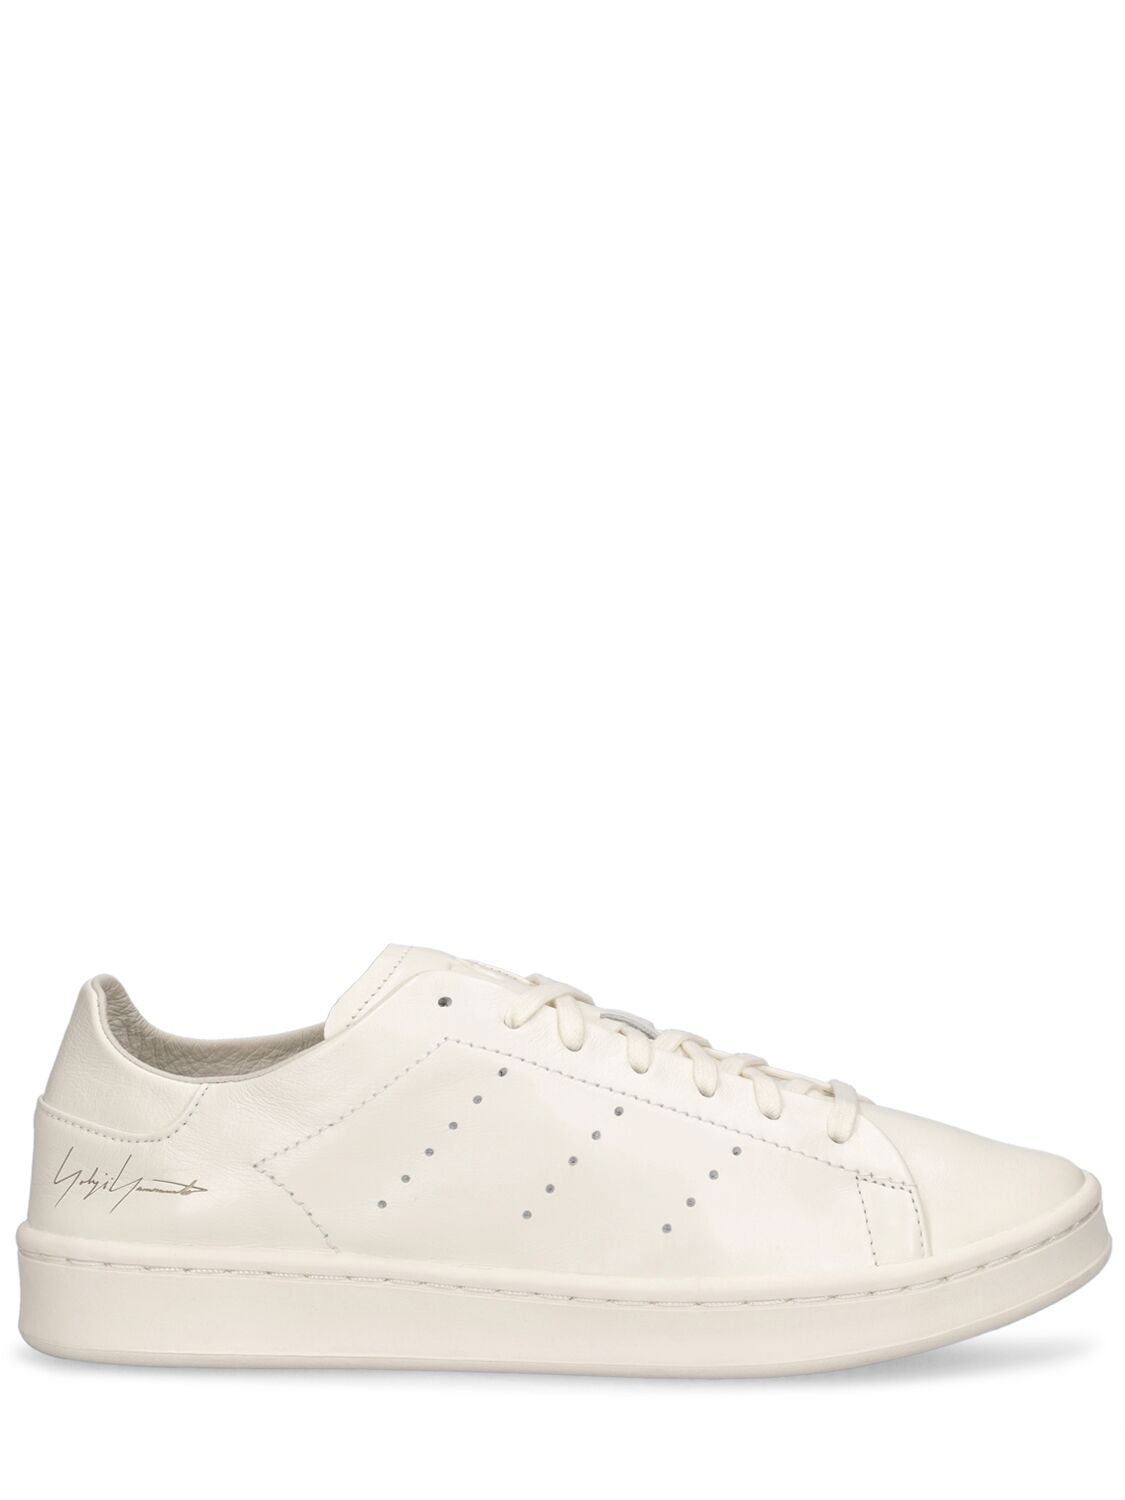 Y-3 Stan Smith Sneakers In White